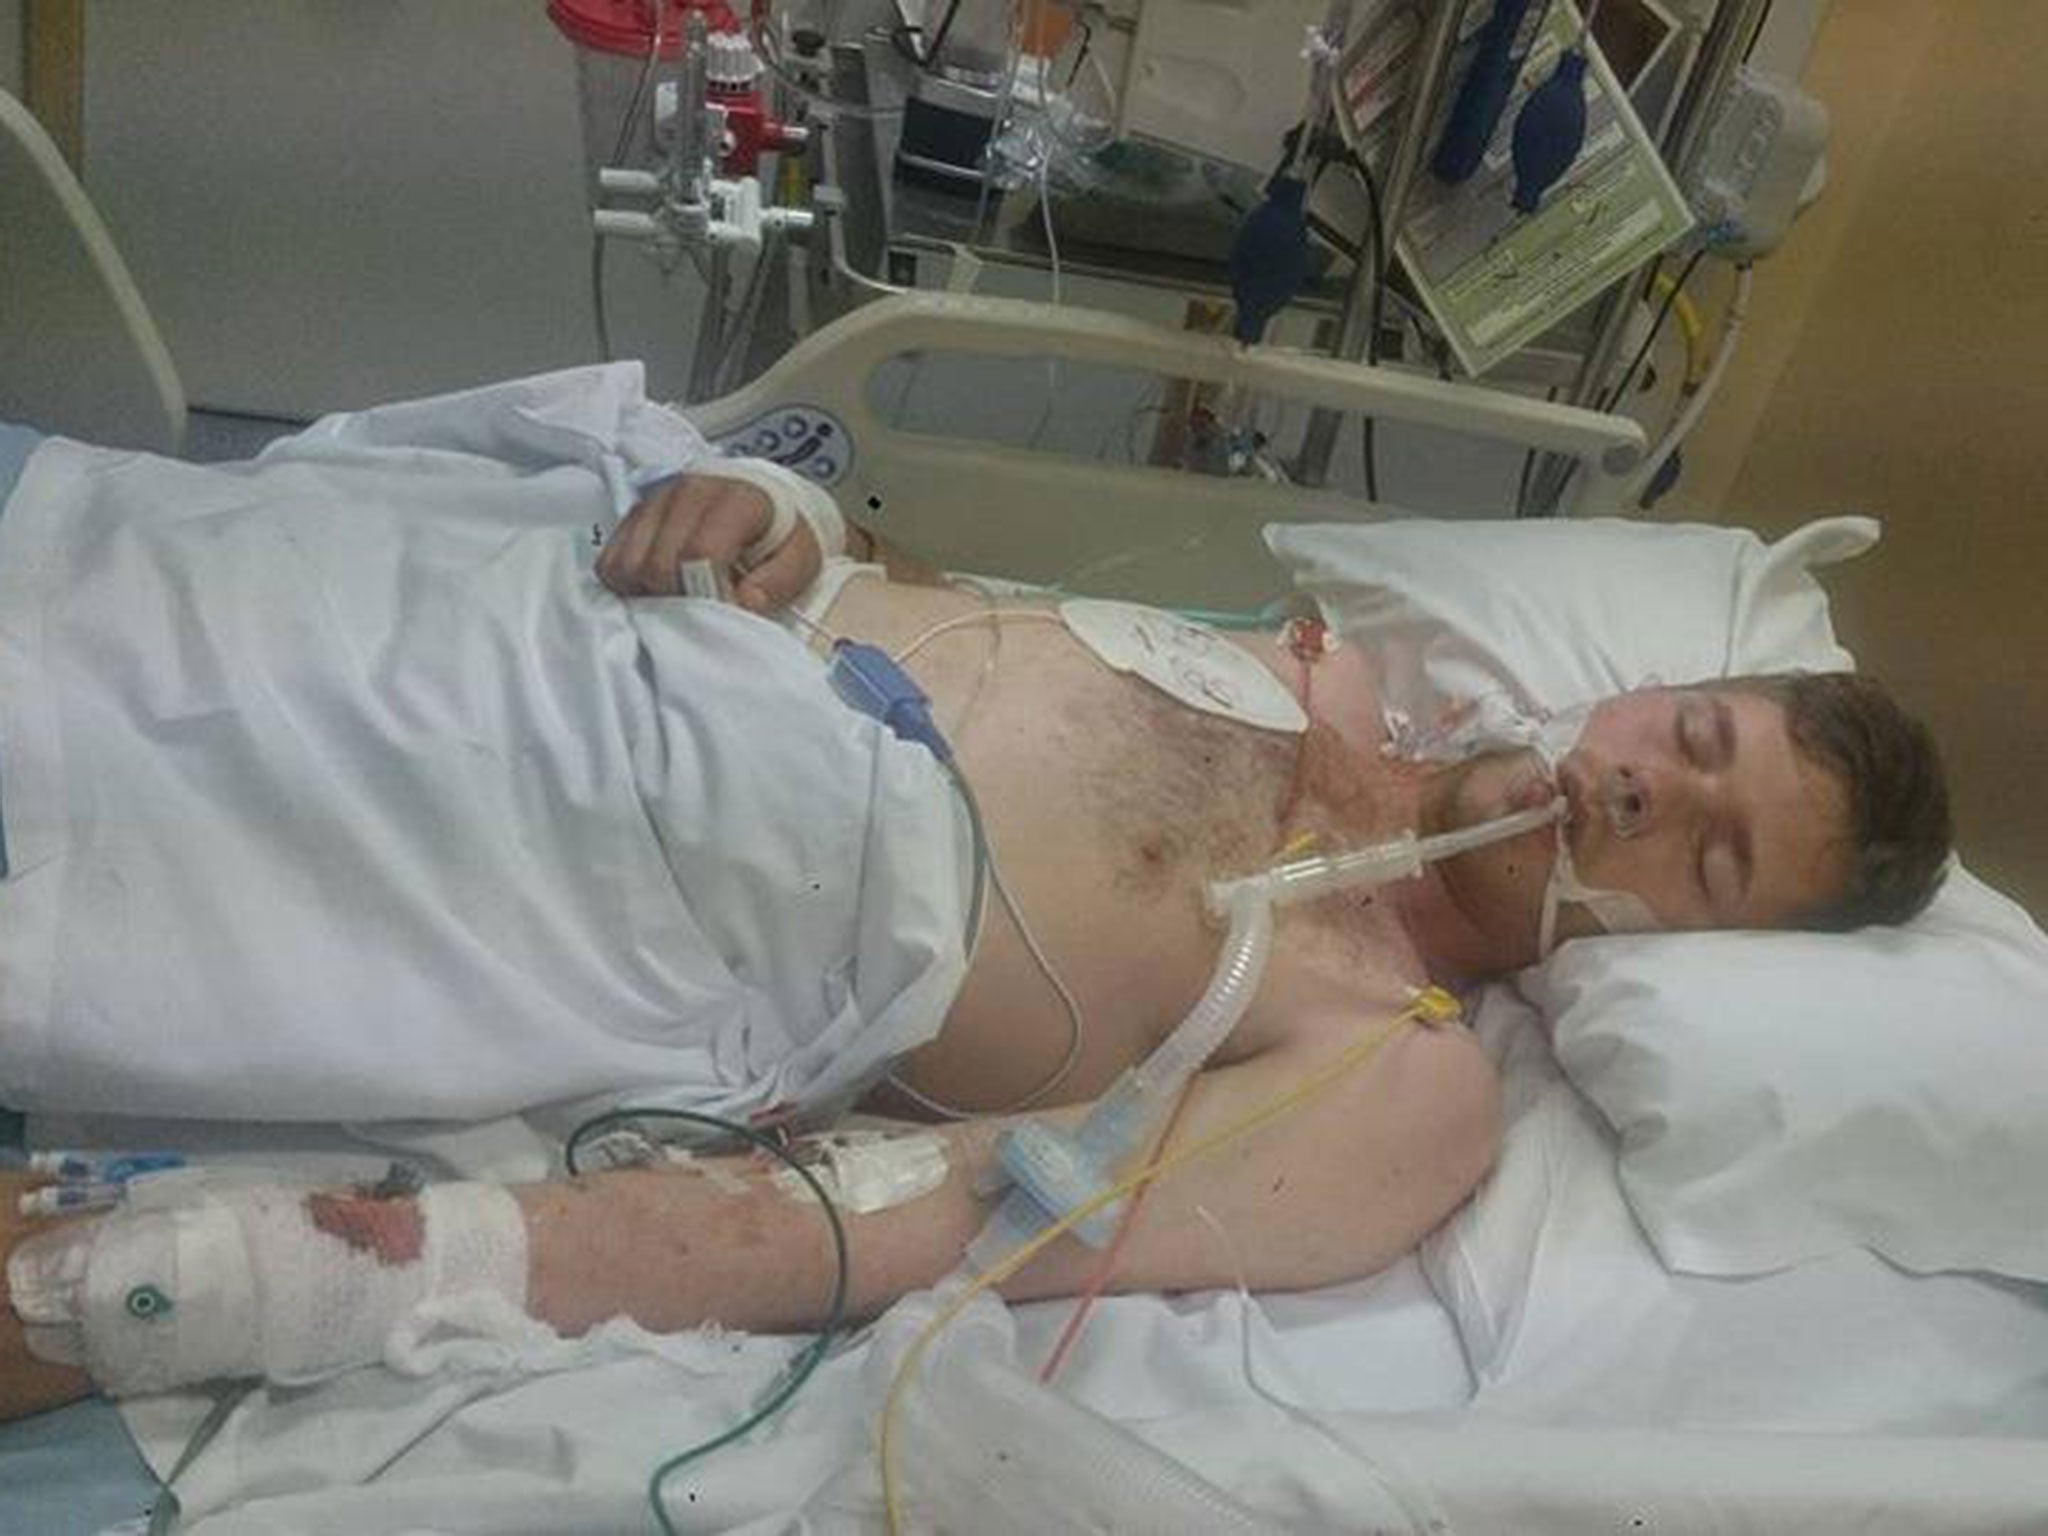 A photograph shared by Jordan Blackburn of himself in an induced coma, which he had been put in after taking legal highs at Kendal Calling